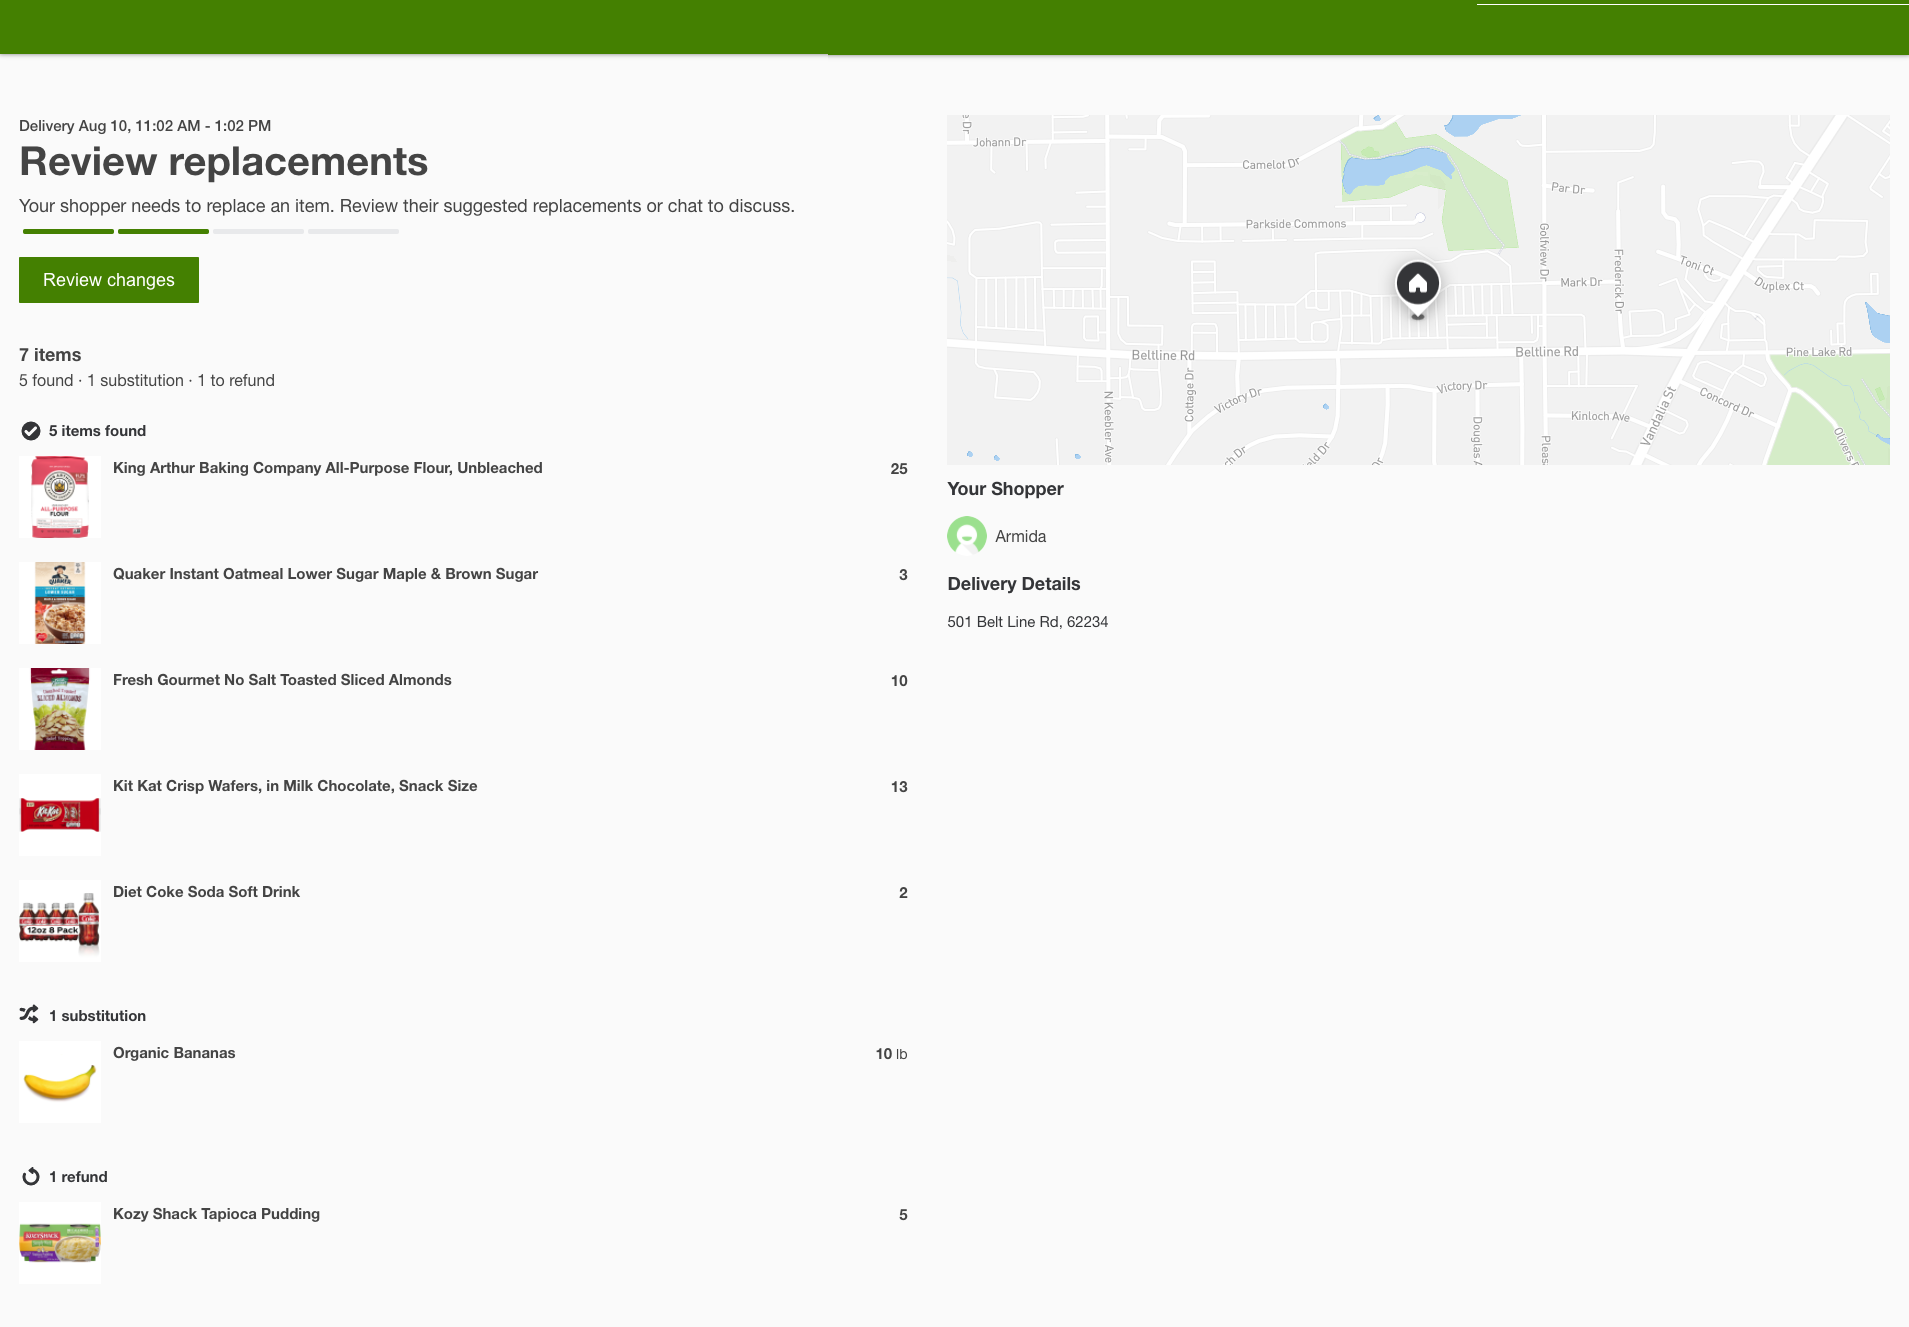 The image shows the Review replacements page in a browser view. On the left is the delivery date and time, the status, a message inviting the customer to review replacements, and the items in the order with 5 found, 1 replacement, and 1 refund. On the right is the map with the customer location, the shopper&#39;s name Amida, and a delivery address of 501 Belt Line Rd. 62234.